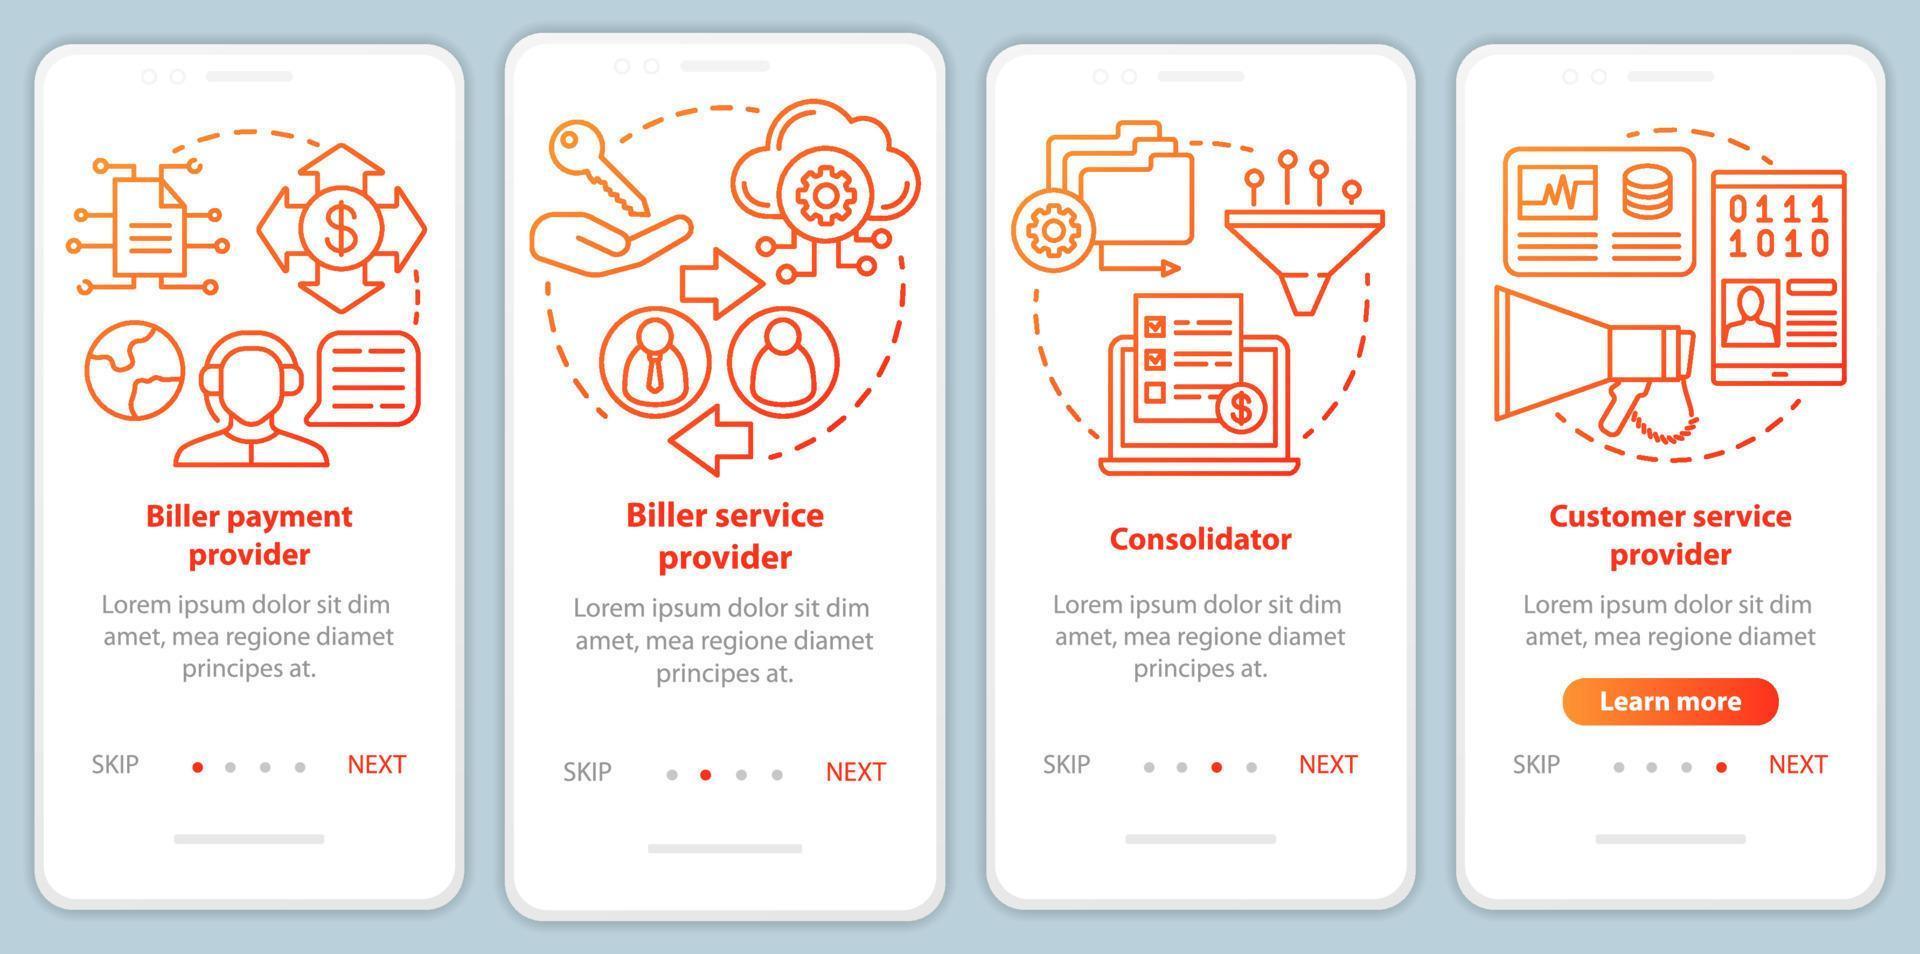 Billing services onboarding mobile app page screen vector template. Biller payment, advice provider. Walkthrough website steps with linear illustrations. UX, UI, GUI smartphone interface concept